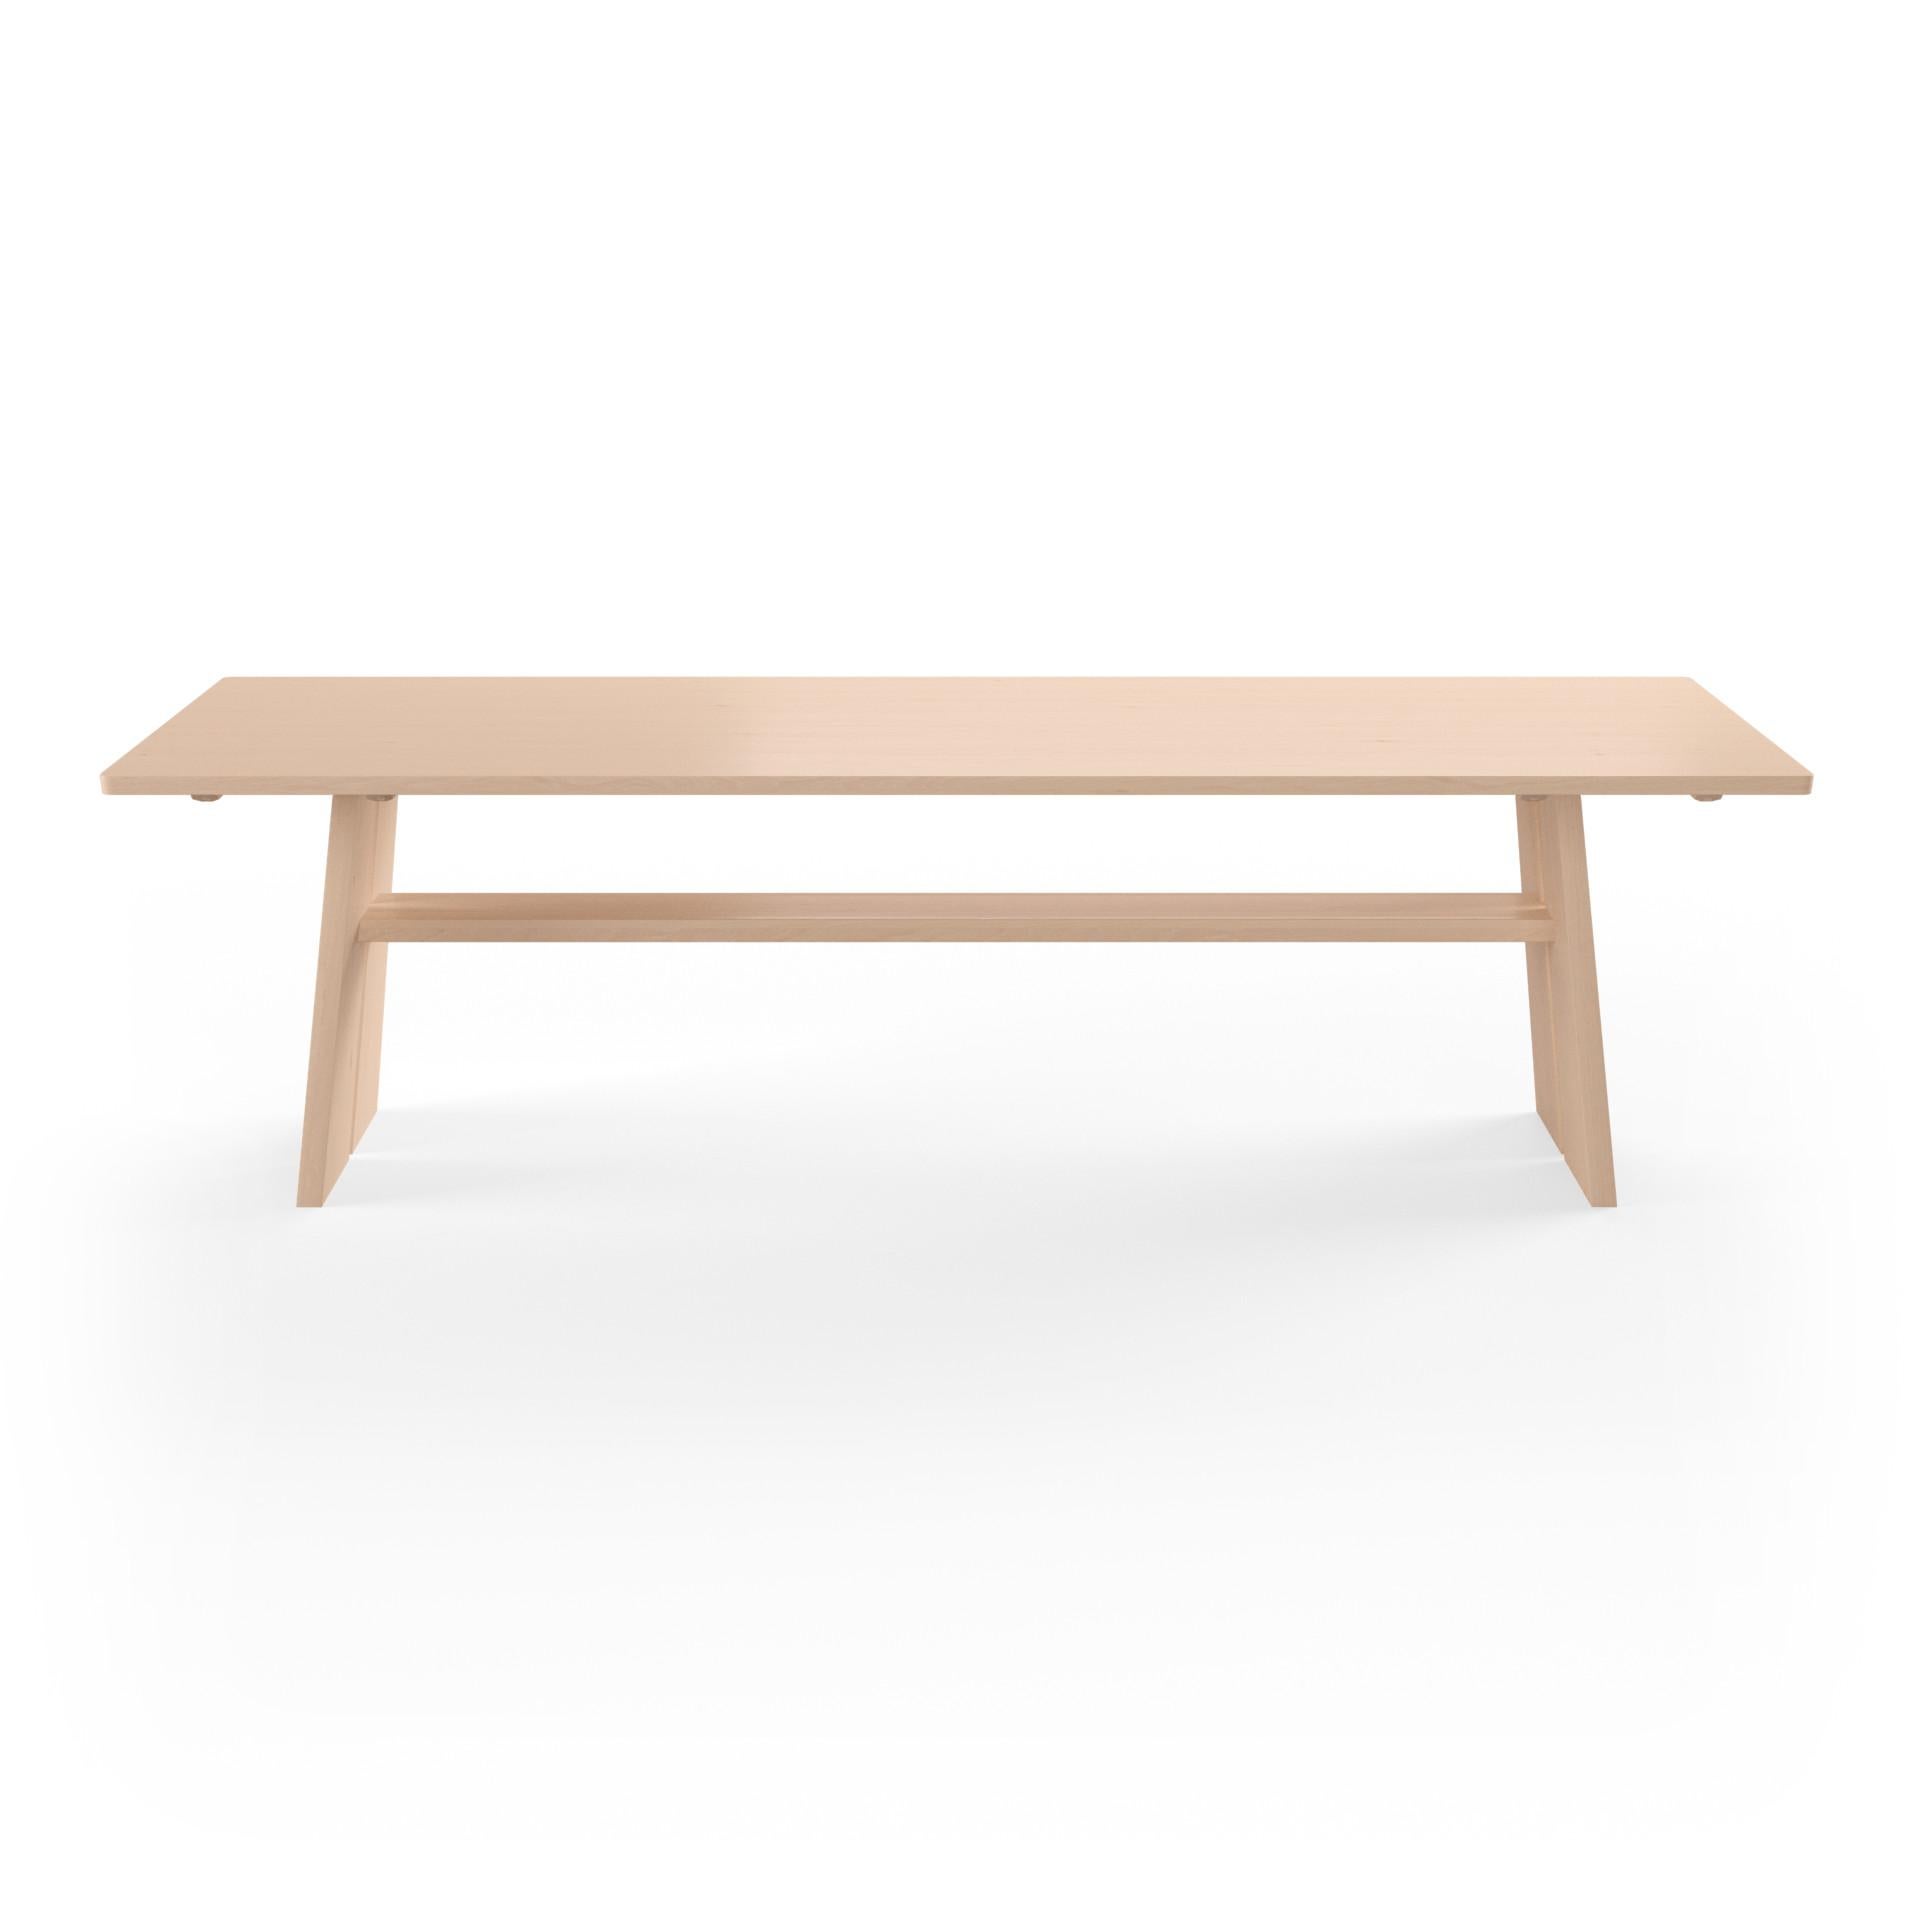 Hand-Crafted GM3060 Table, Oak White oil - Design by Nissen & Gehl MDD For Sale